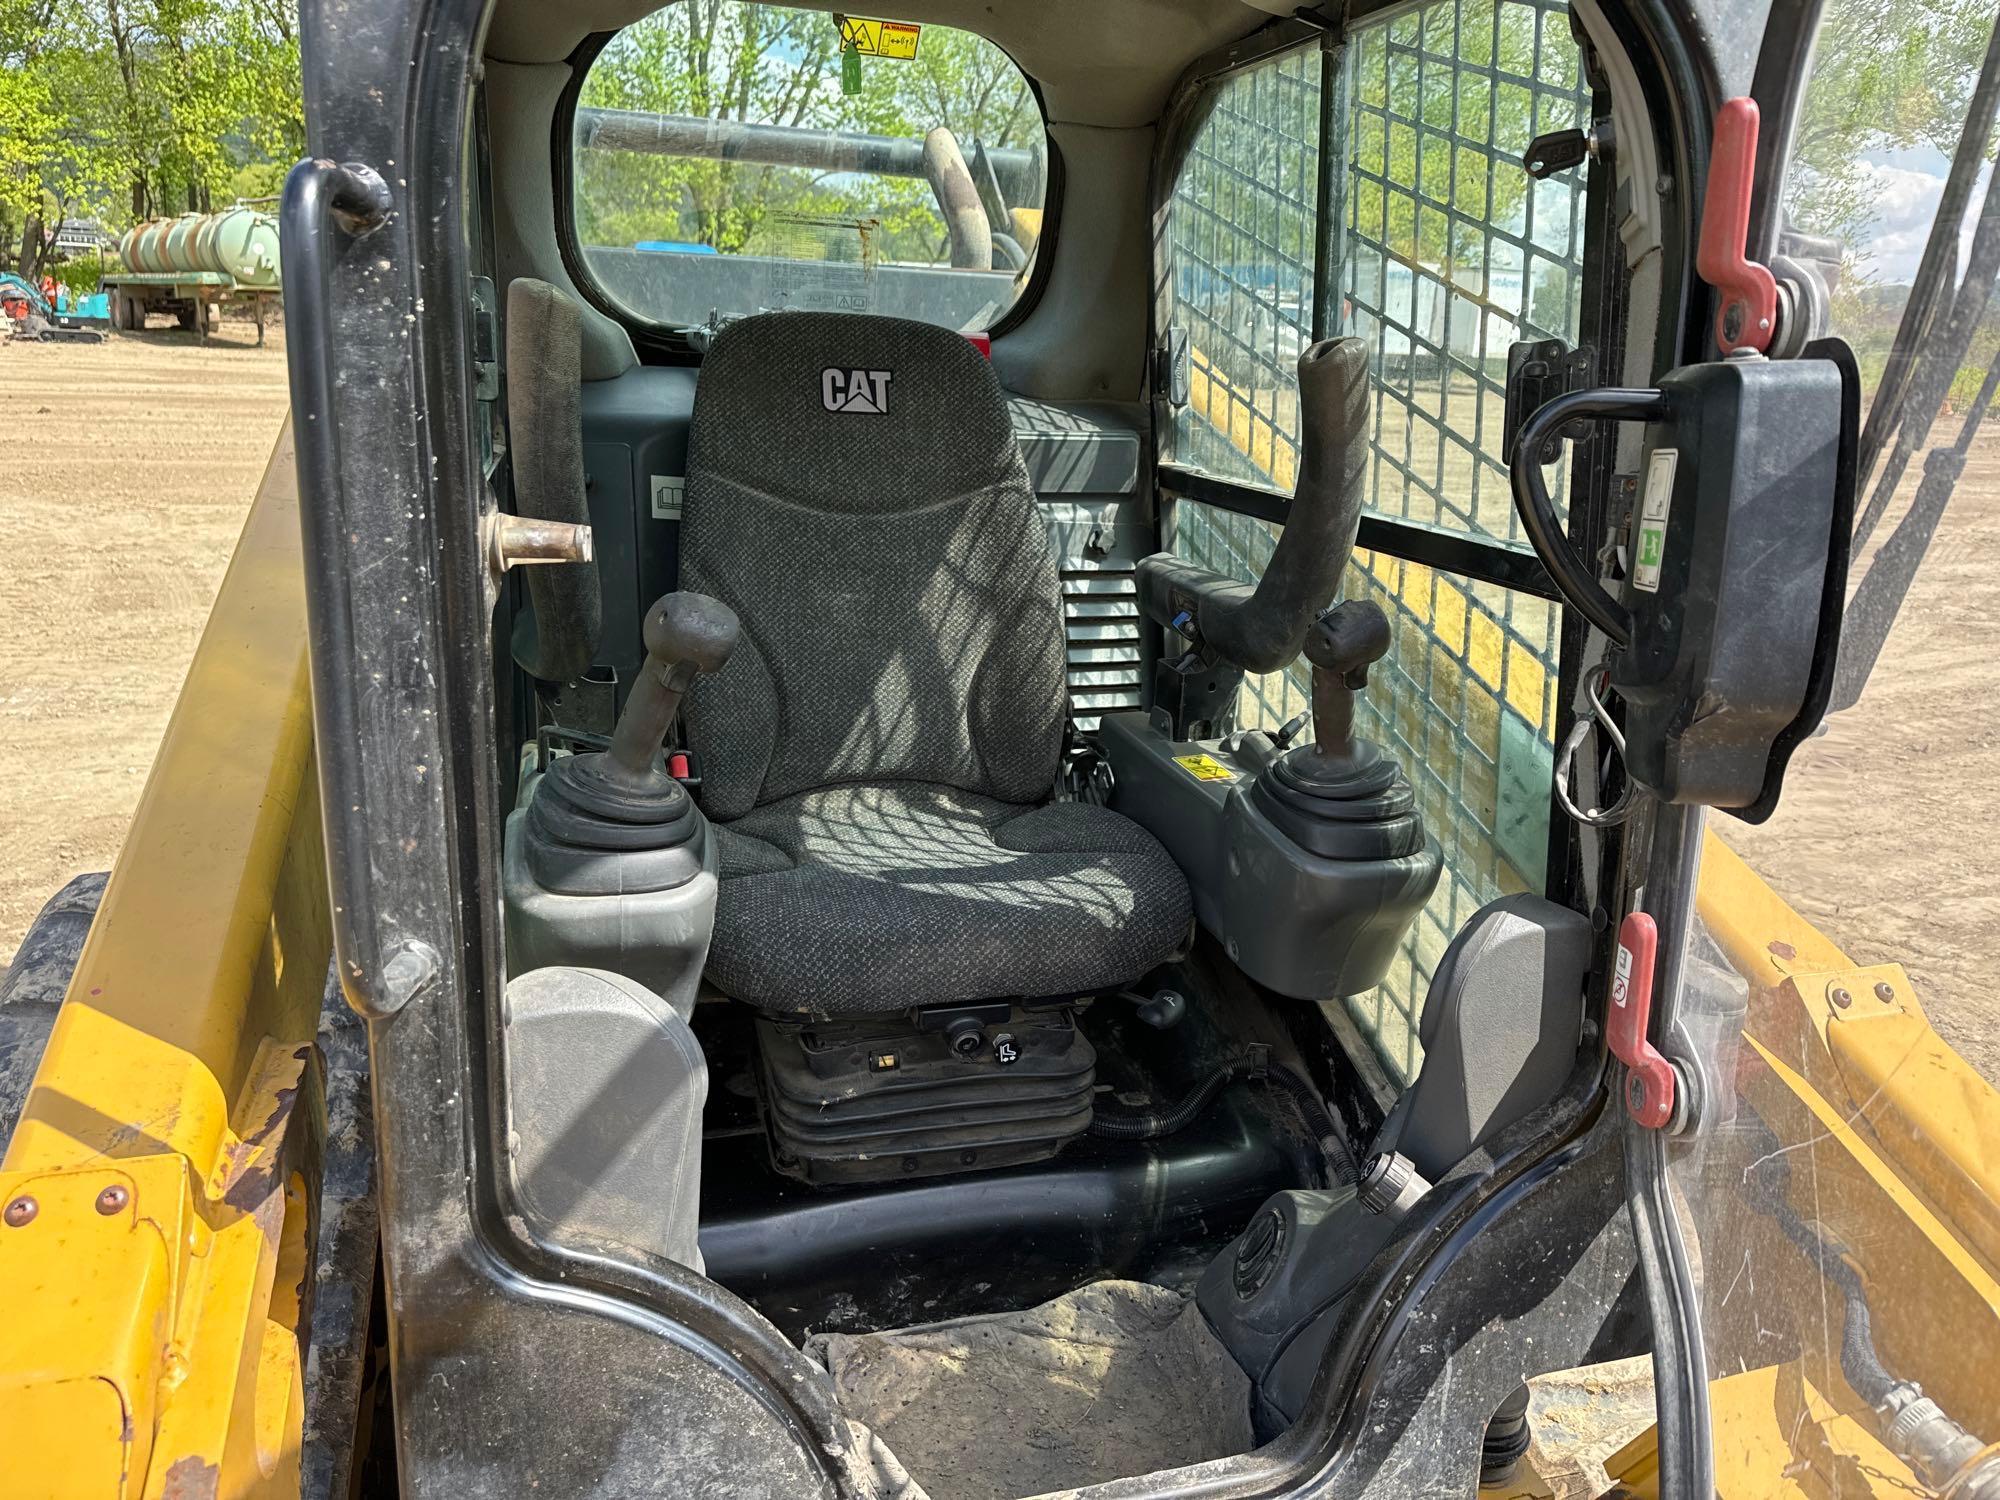 2017 CAT 299D2XPS RUBBER TRACKED SKID STEER SN:FD202726 powered by Cat diesel engine, equipped with